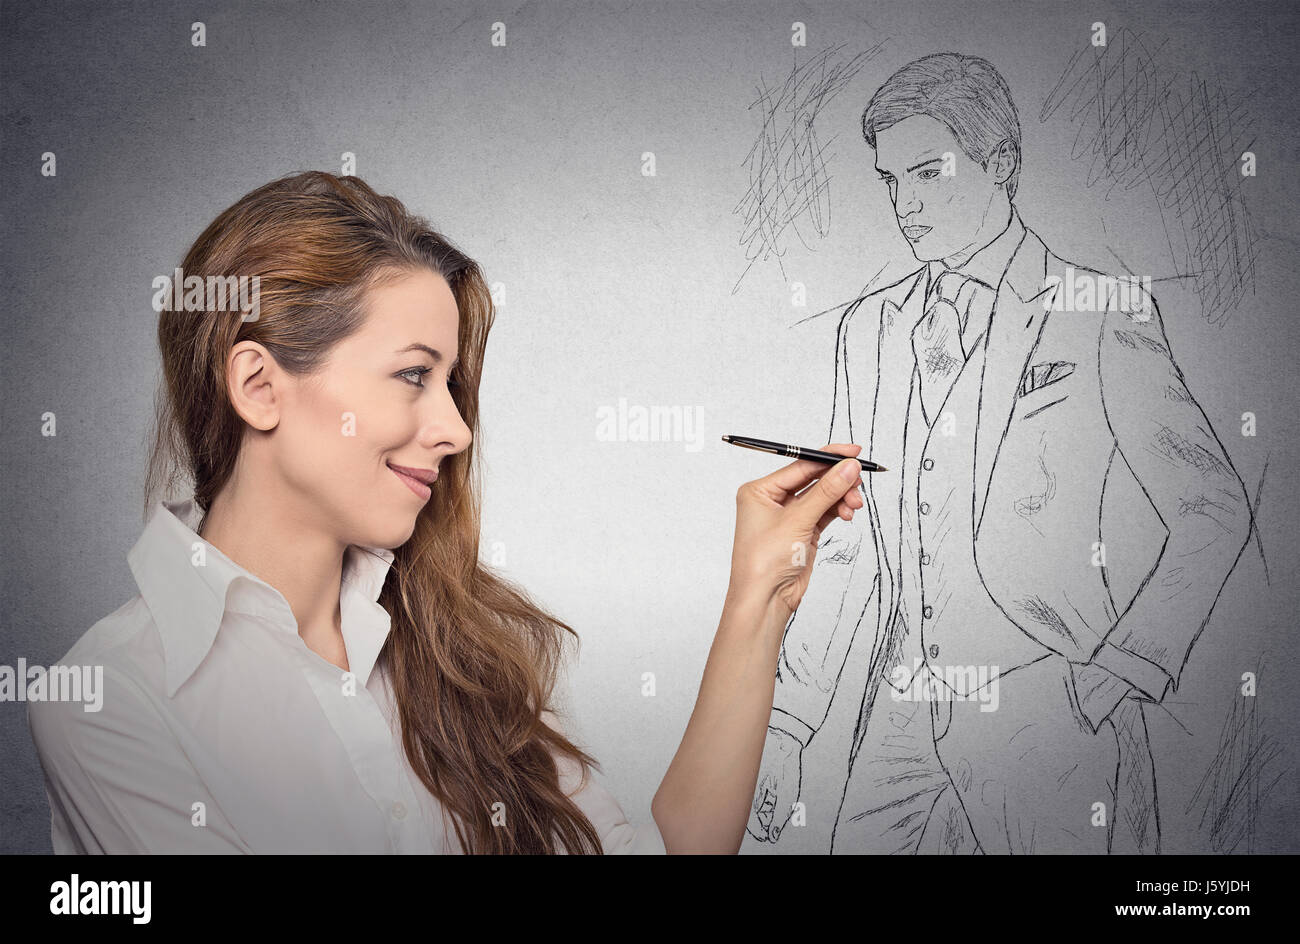 woman stylist drawing sketch of male model dressed in suit Stock Photo